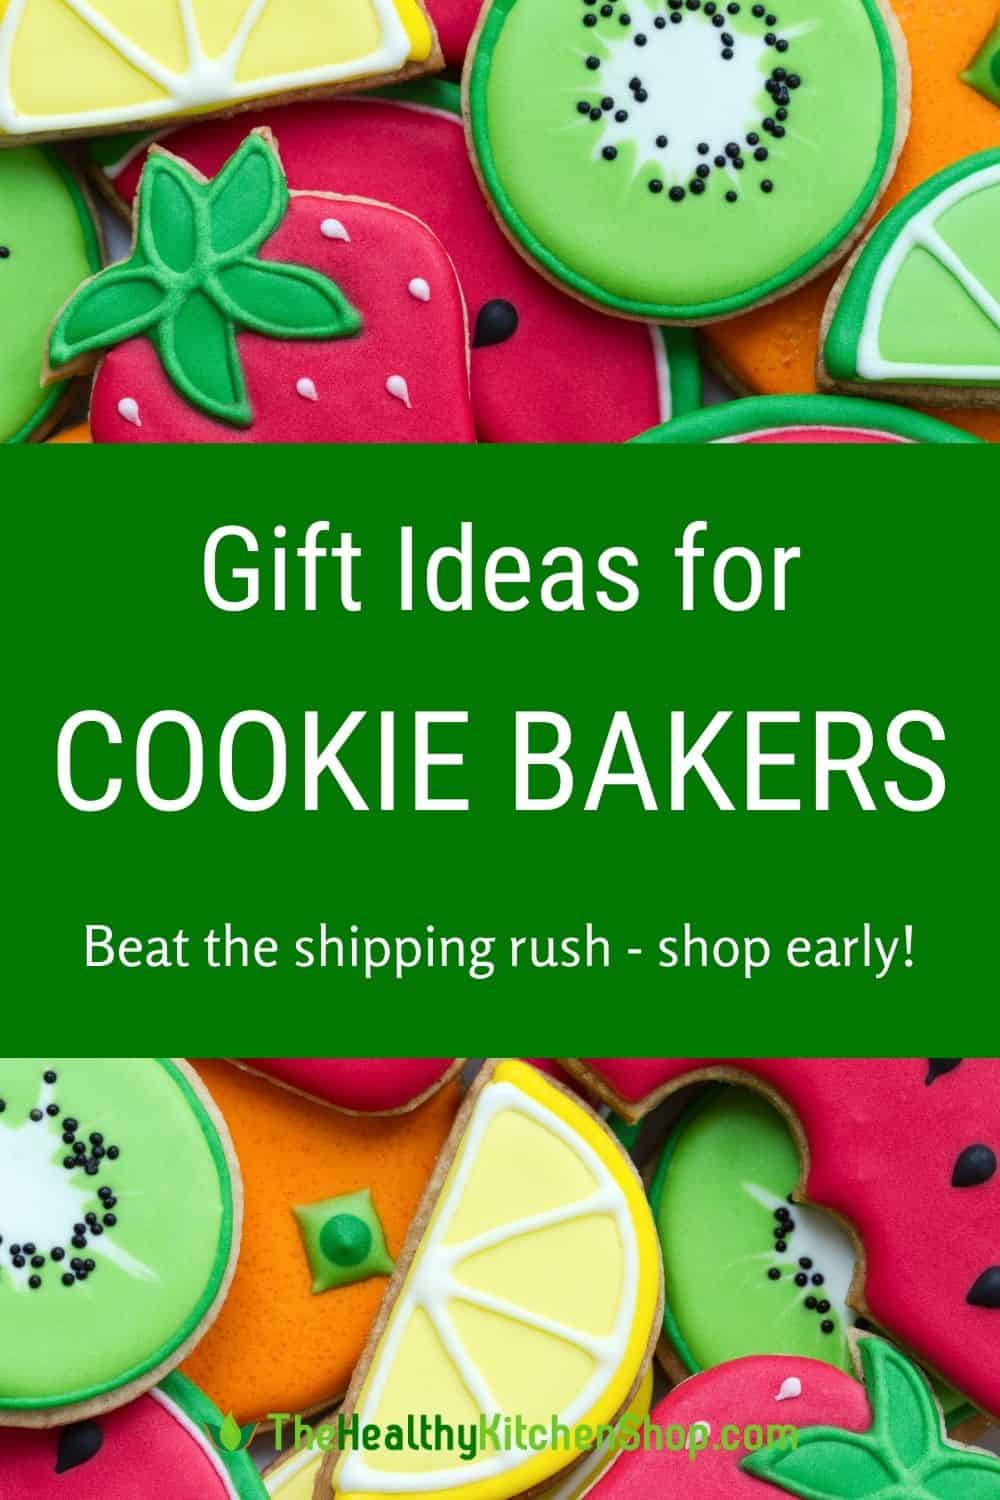 Gift Ideas for Cookie Bakers